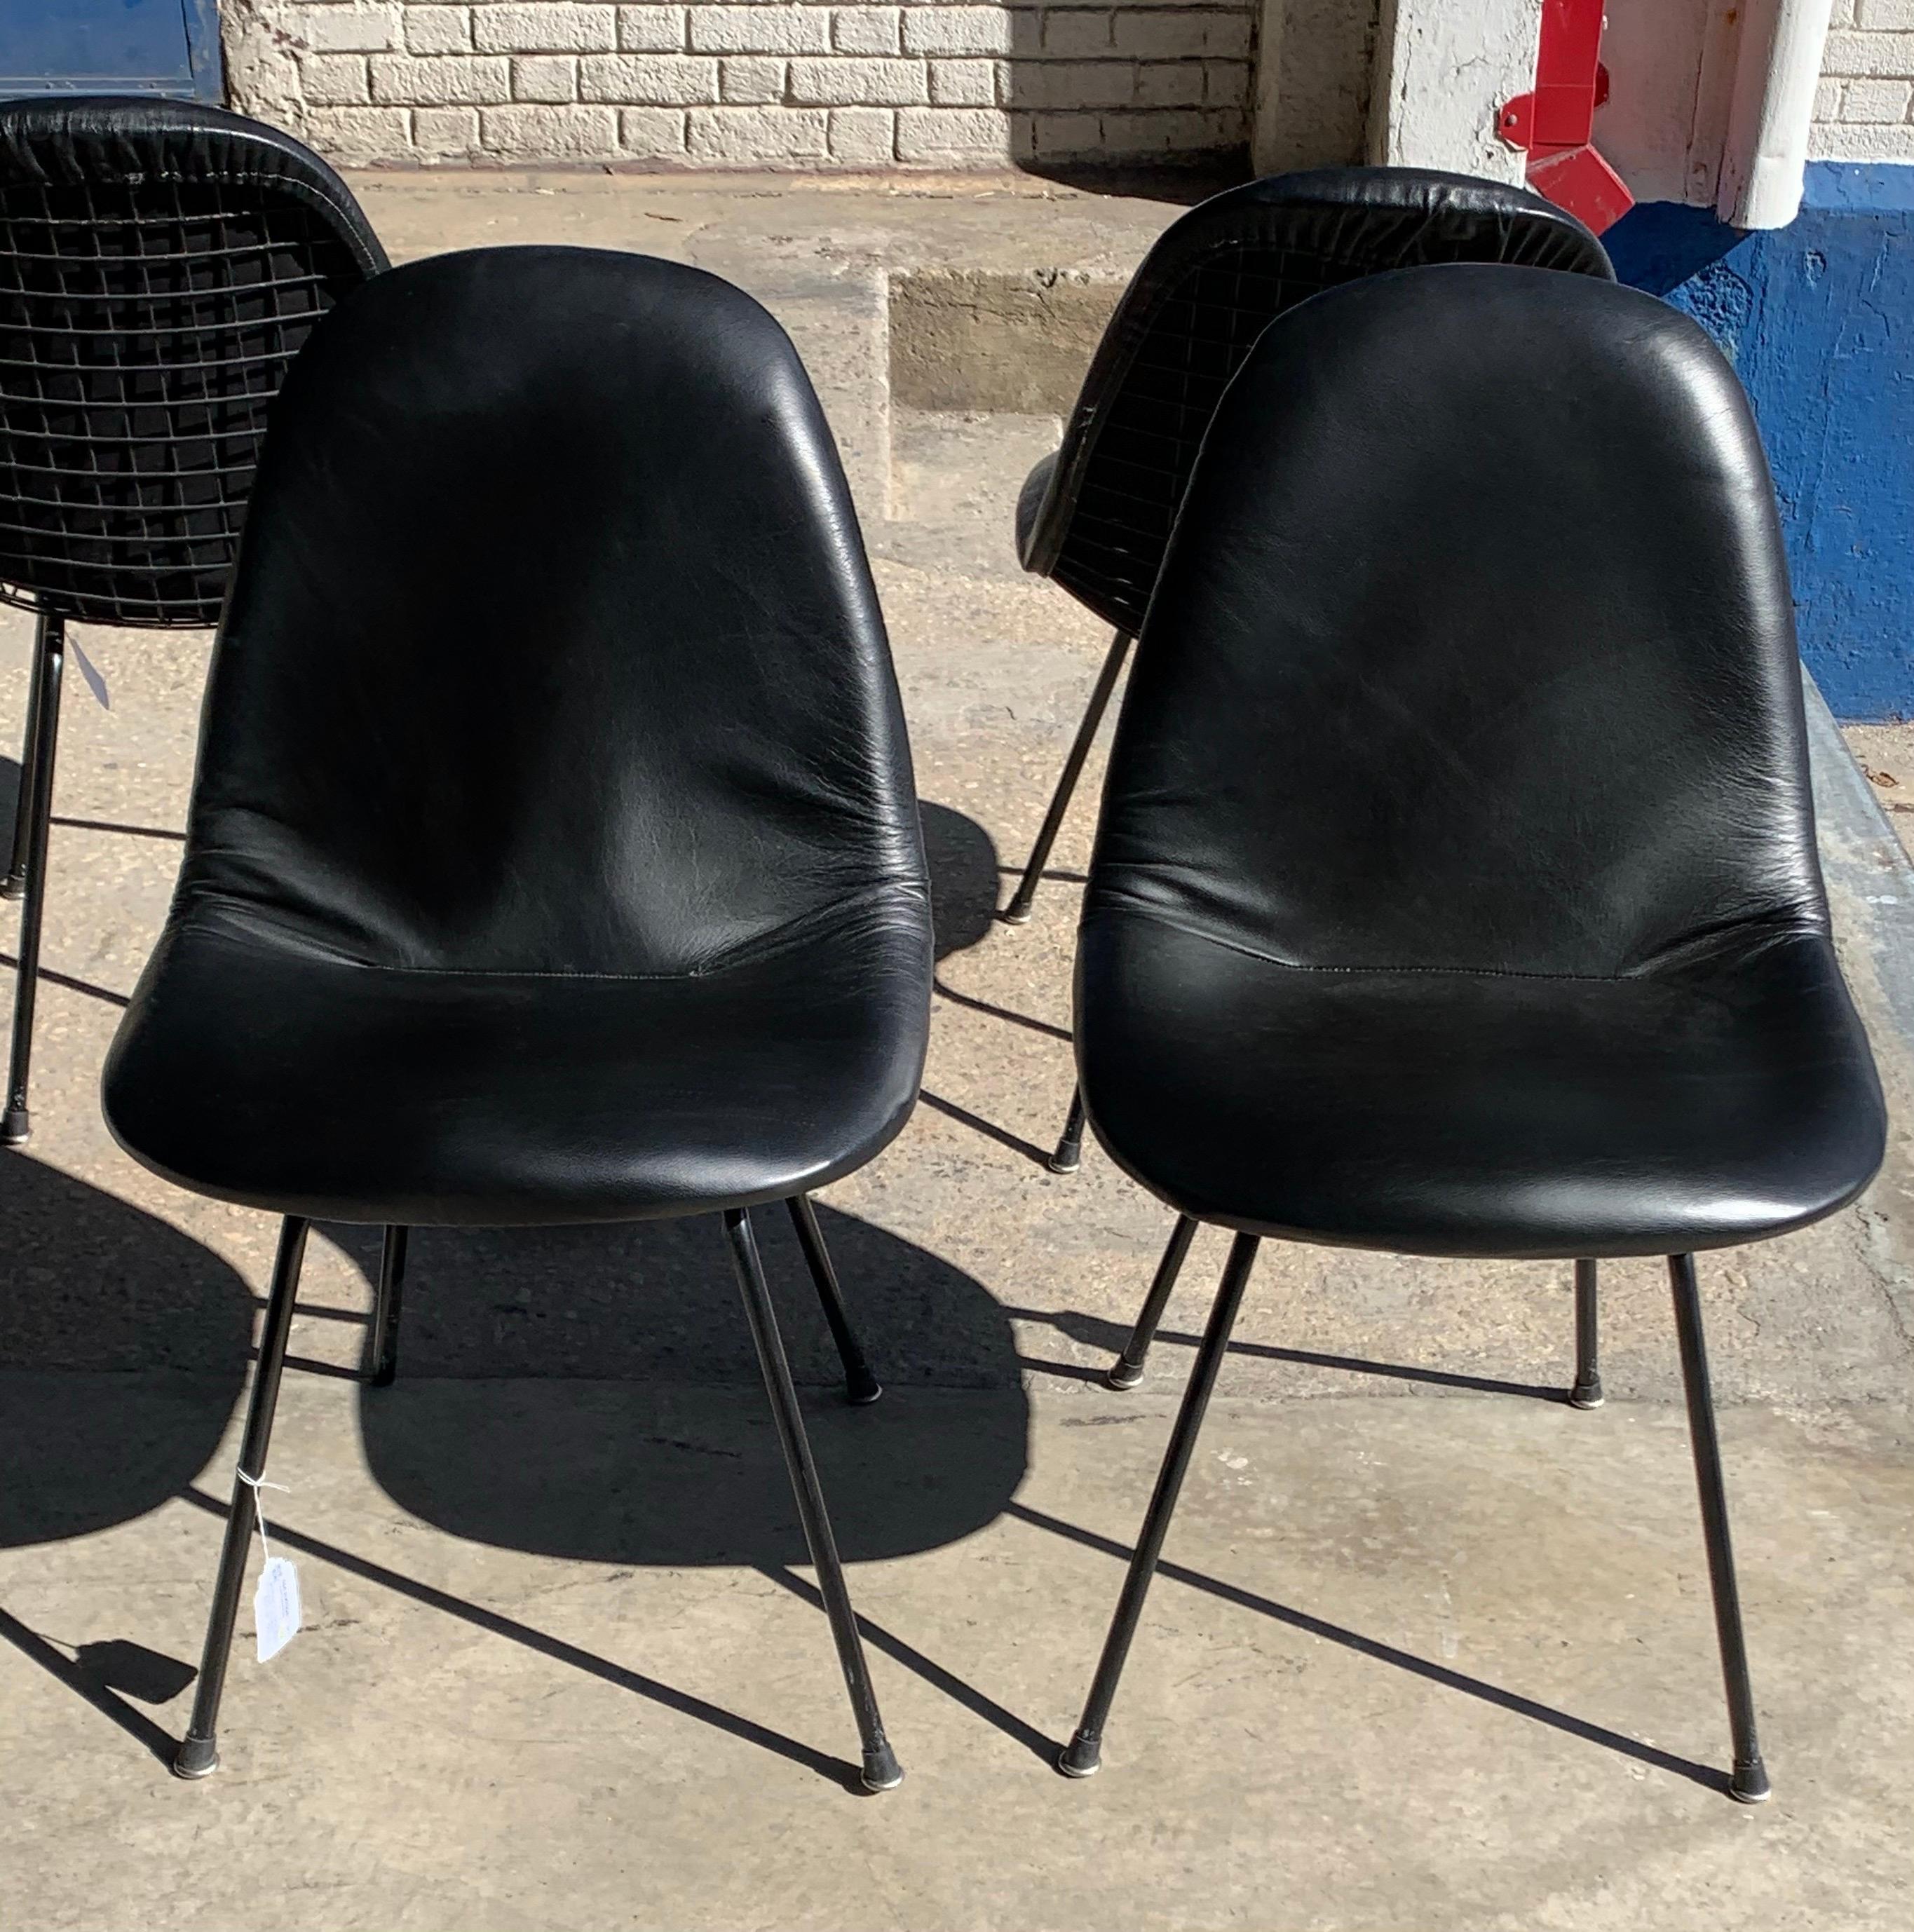 Charles and Ray Eames for Herman Miller DKX-1 chair, black leather, H-base, circa 1954, Boot glides .Pricing is per chair. Please change quantity to 4 to purchase entire set.

The abbreviated Eames DKX chair, part of the Wire Mesh Series, stood for